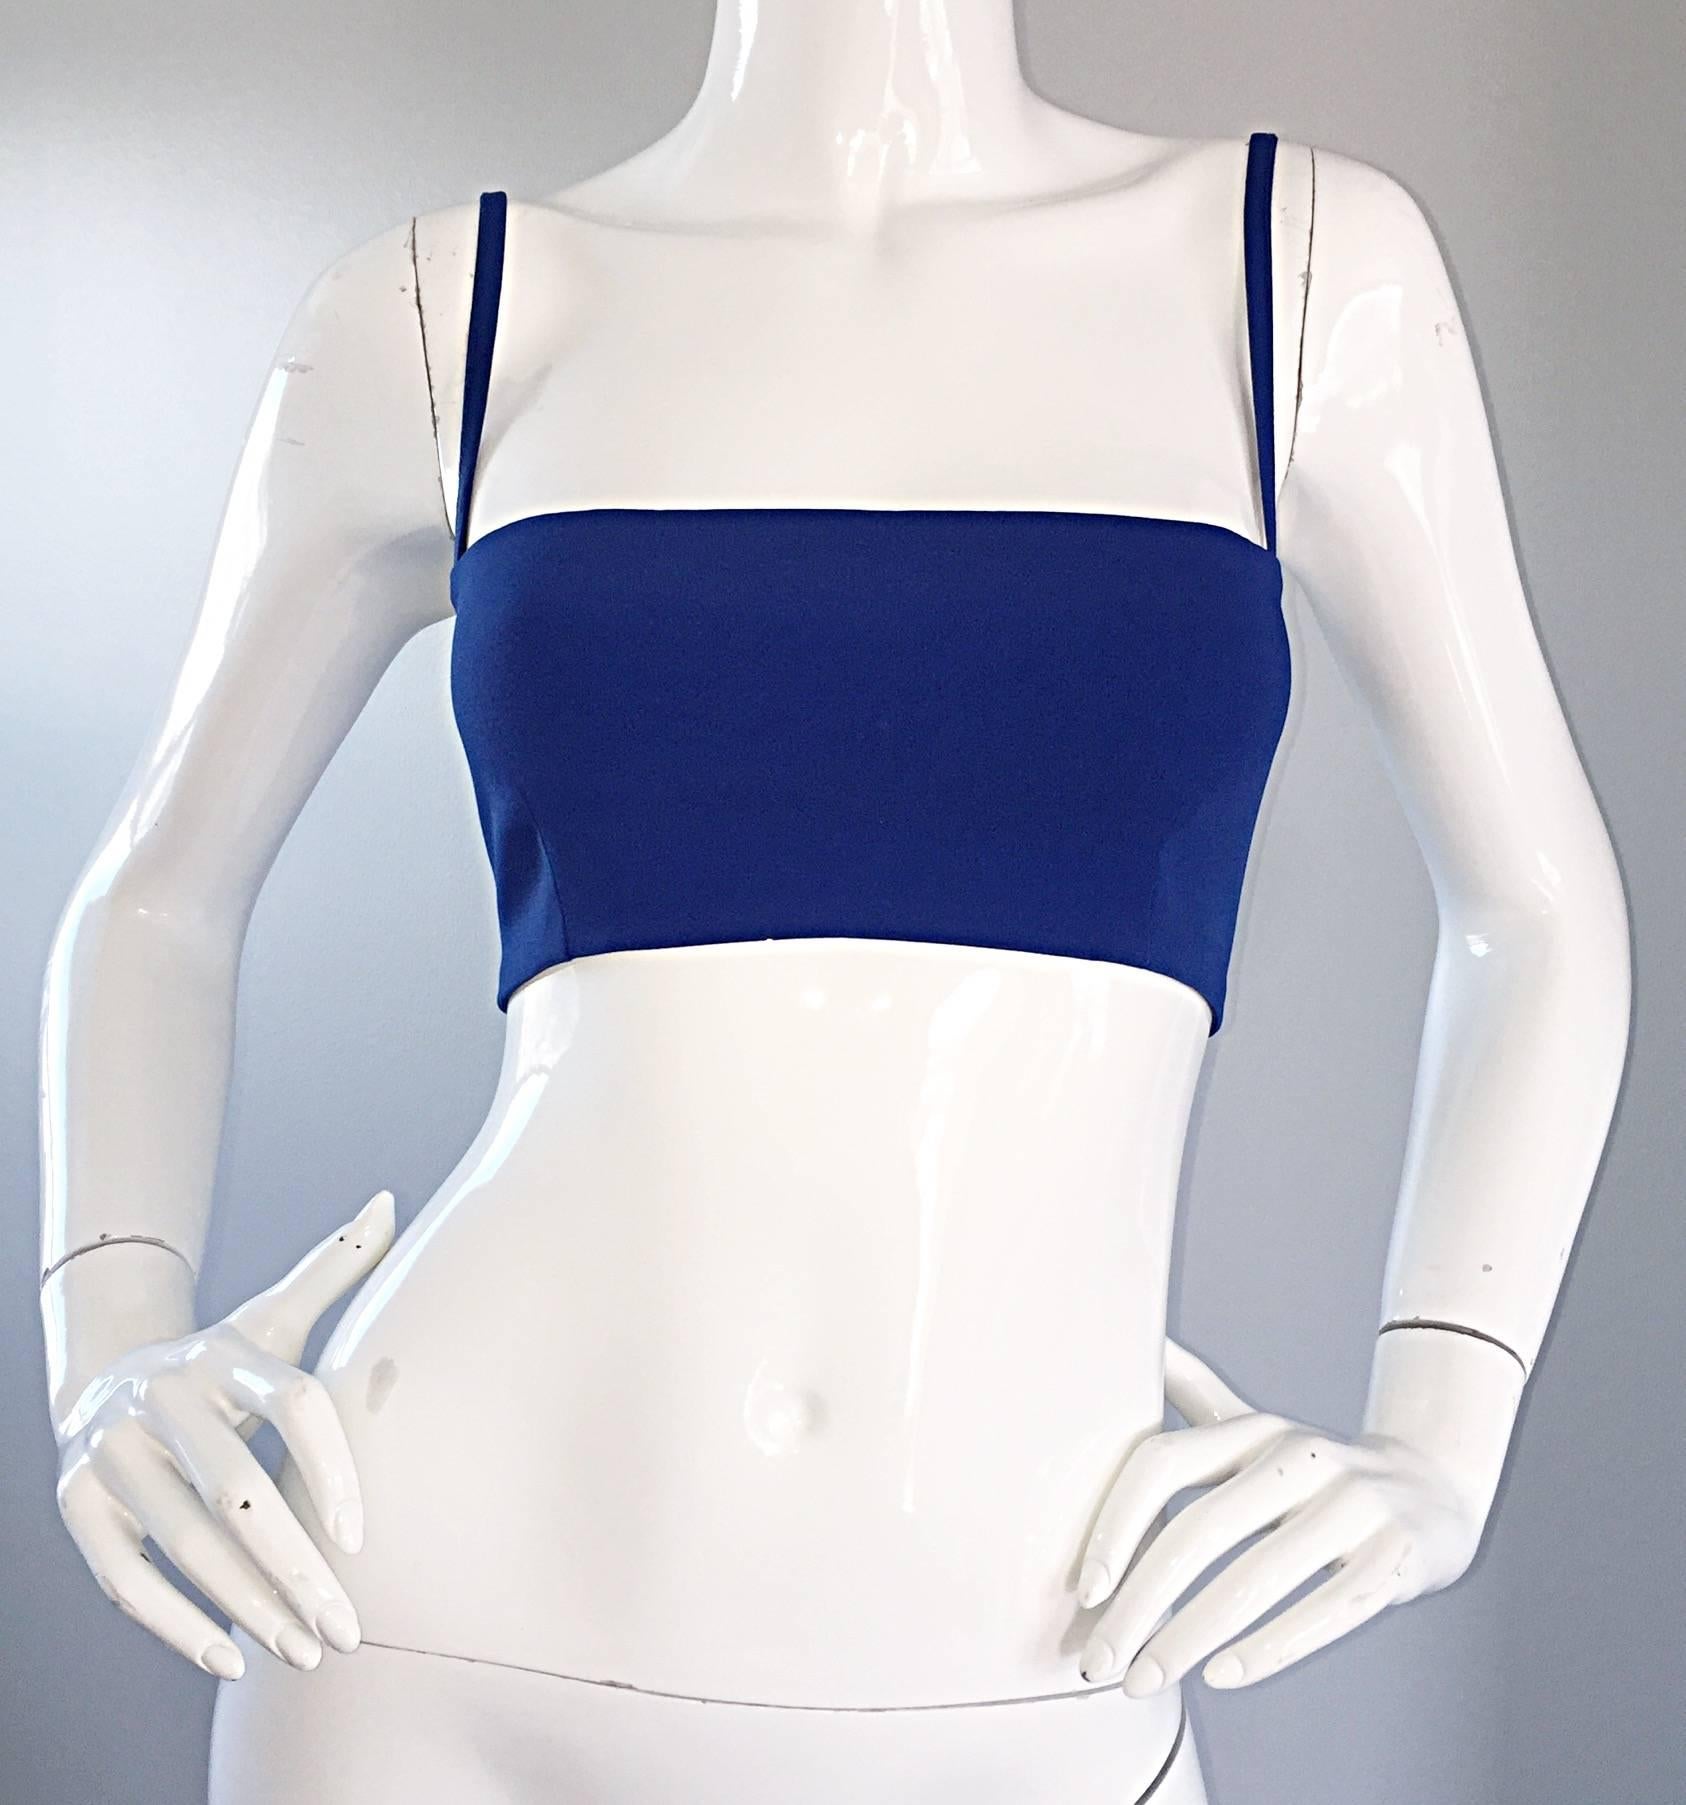 Sexy vintage GIANNI VERSACE VERSUS royal blue stretch crop top! Features an oversized blue zipper at the left side. Can easily be dressed up or down, and great alone or layered. Perfect with shorts, jeans, legging, or a skirt. In great unworn